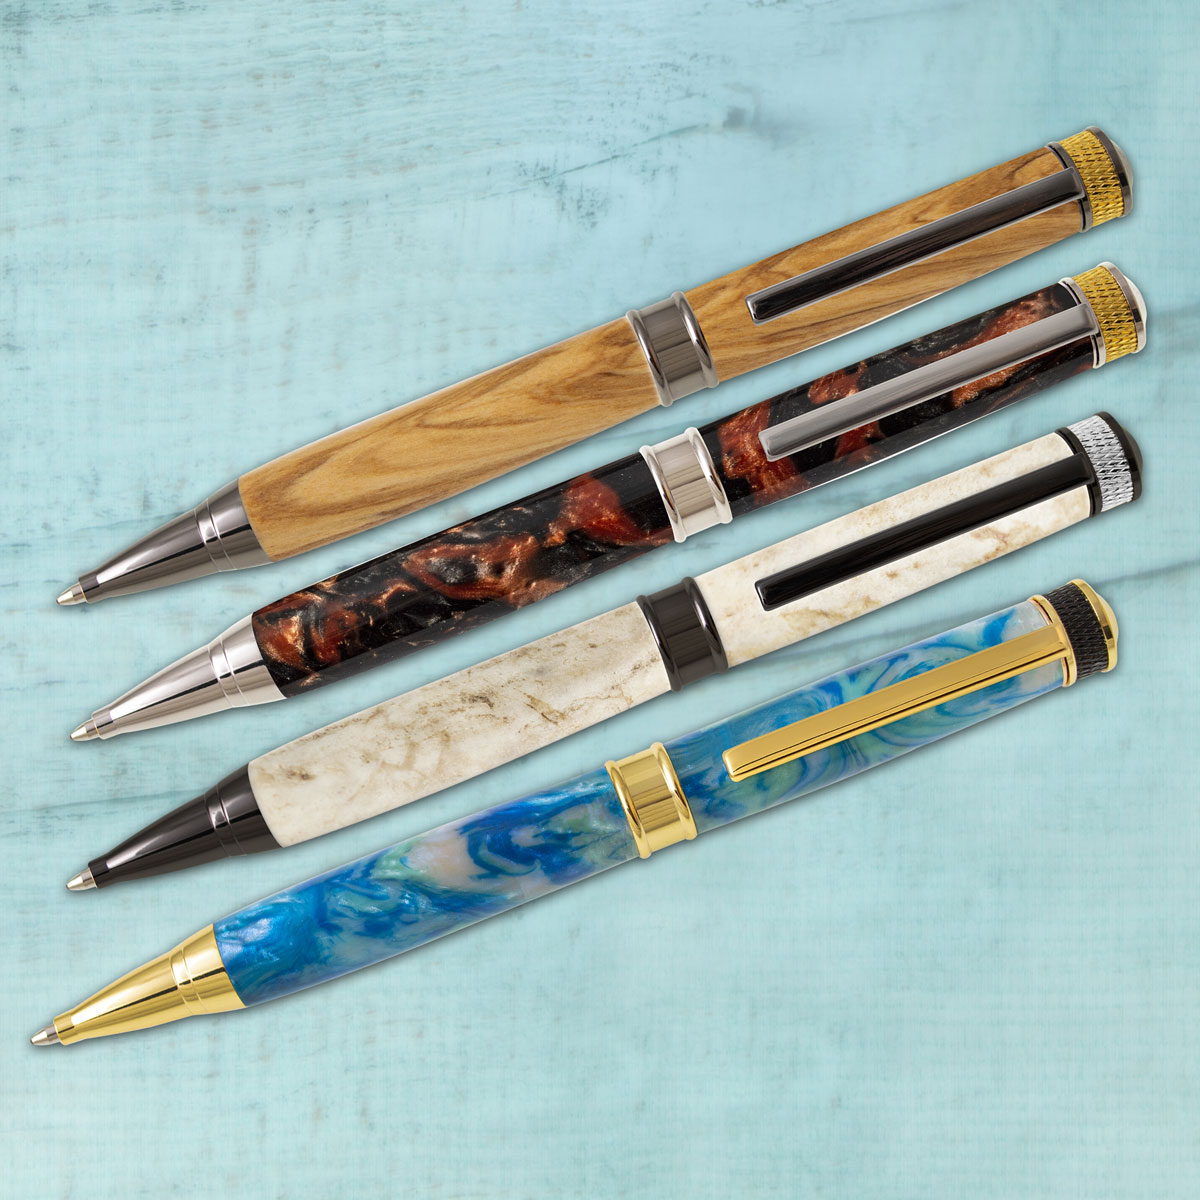 *ON SALE* Magnate Ballpoint Twist Pen boasts an exciting contemporary design.
This exclusive kit comes in 4 different finishes:
PKMAGNATE-24 - 24kt Gold
PKMAGNATE-CH - Chrome
PKMAGNATE-GM - Gunmetal
PKMAGNATE-BC - Black Chrome

#penkits, #penturning

ow.ly/B6qE50OIt5S